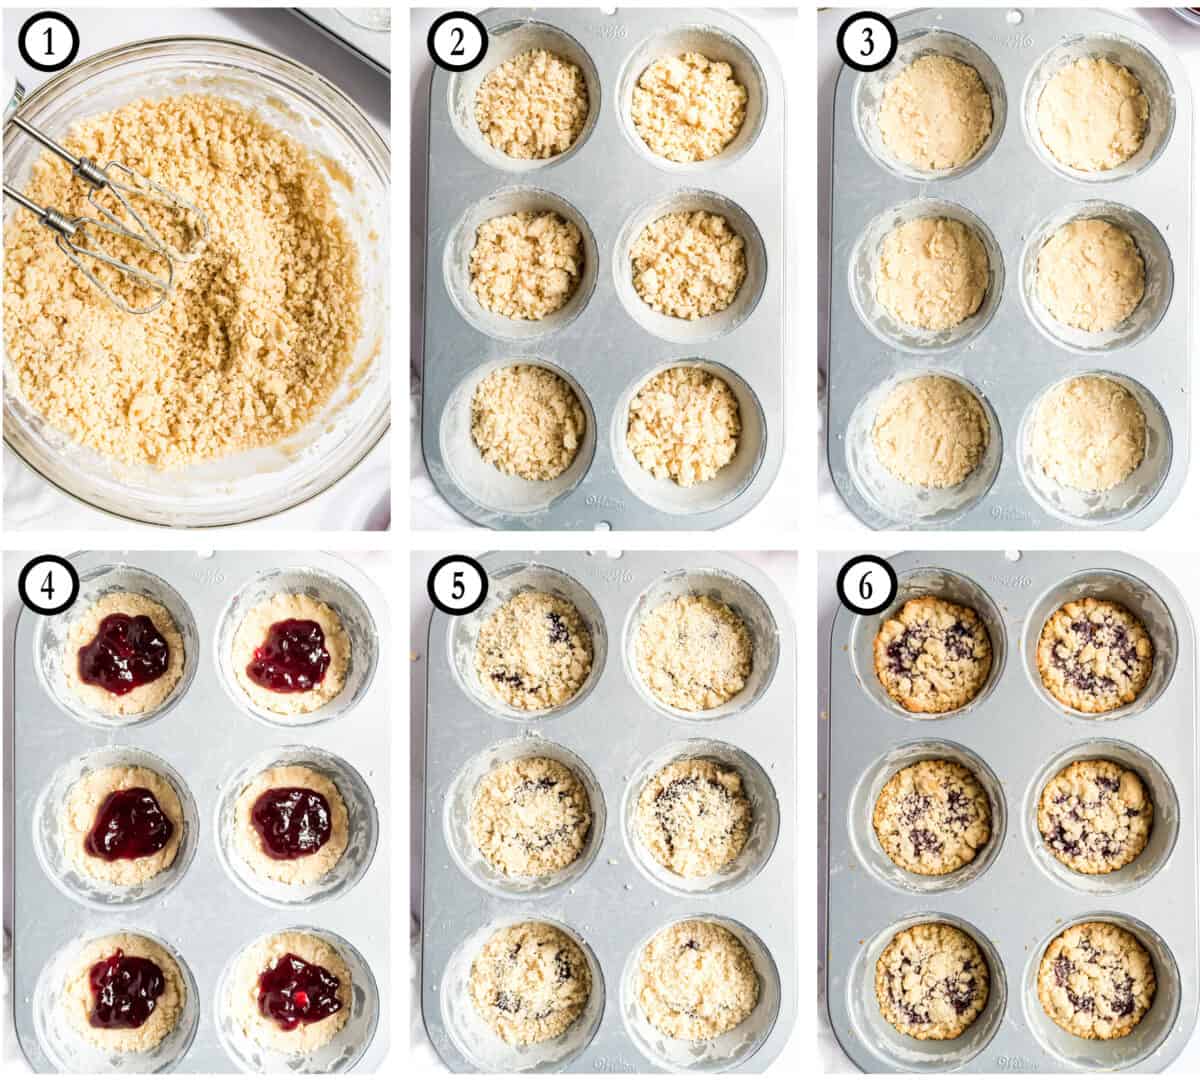 Step by step photos showing how to make Costco raspberry crumble cookies.